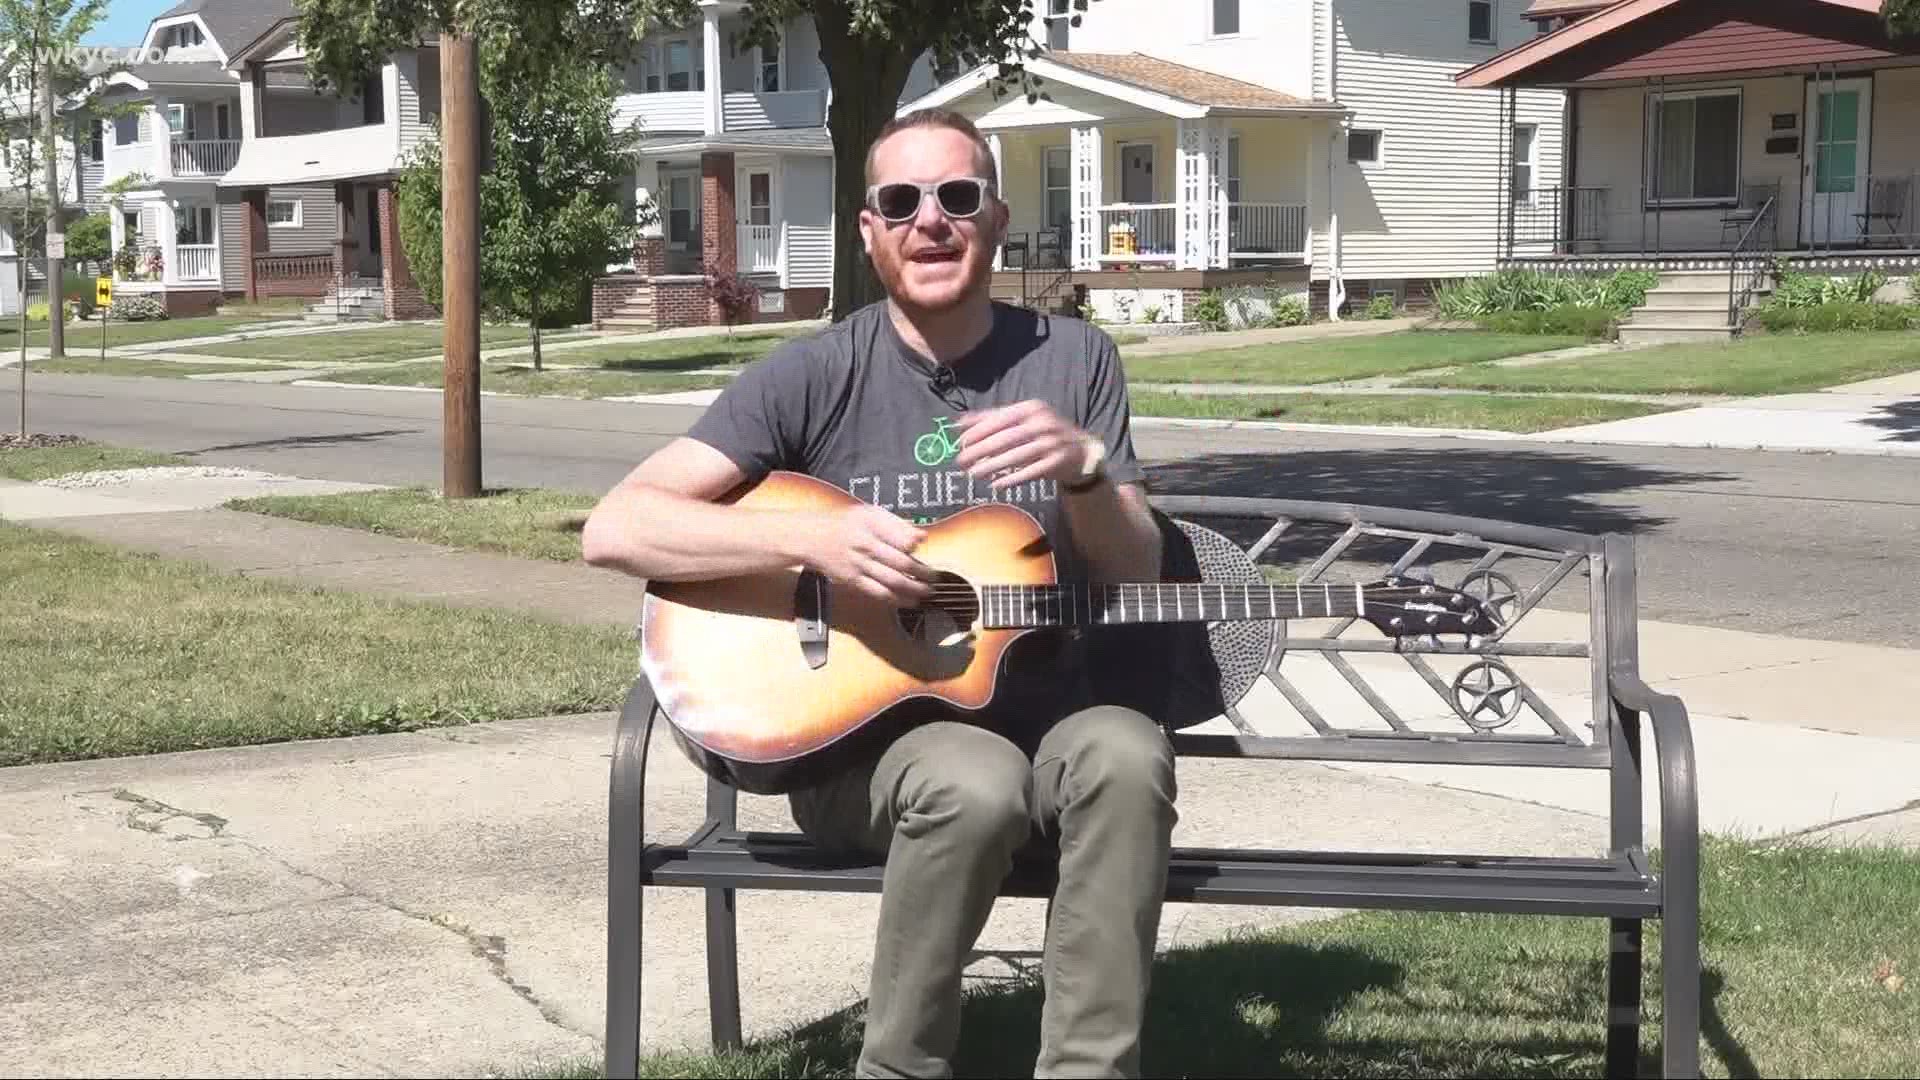 Mike Polk Jr. is using his guitar to bring a smile to your faces. Check out his harmonies.